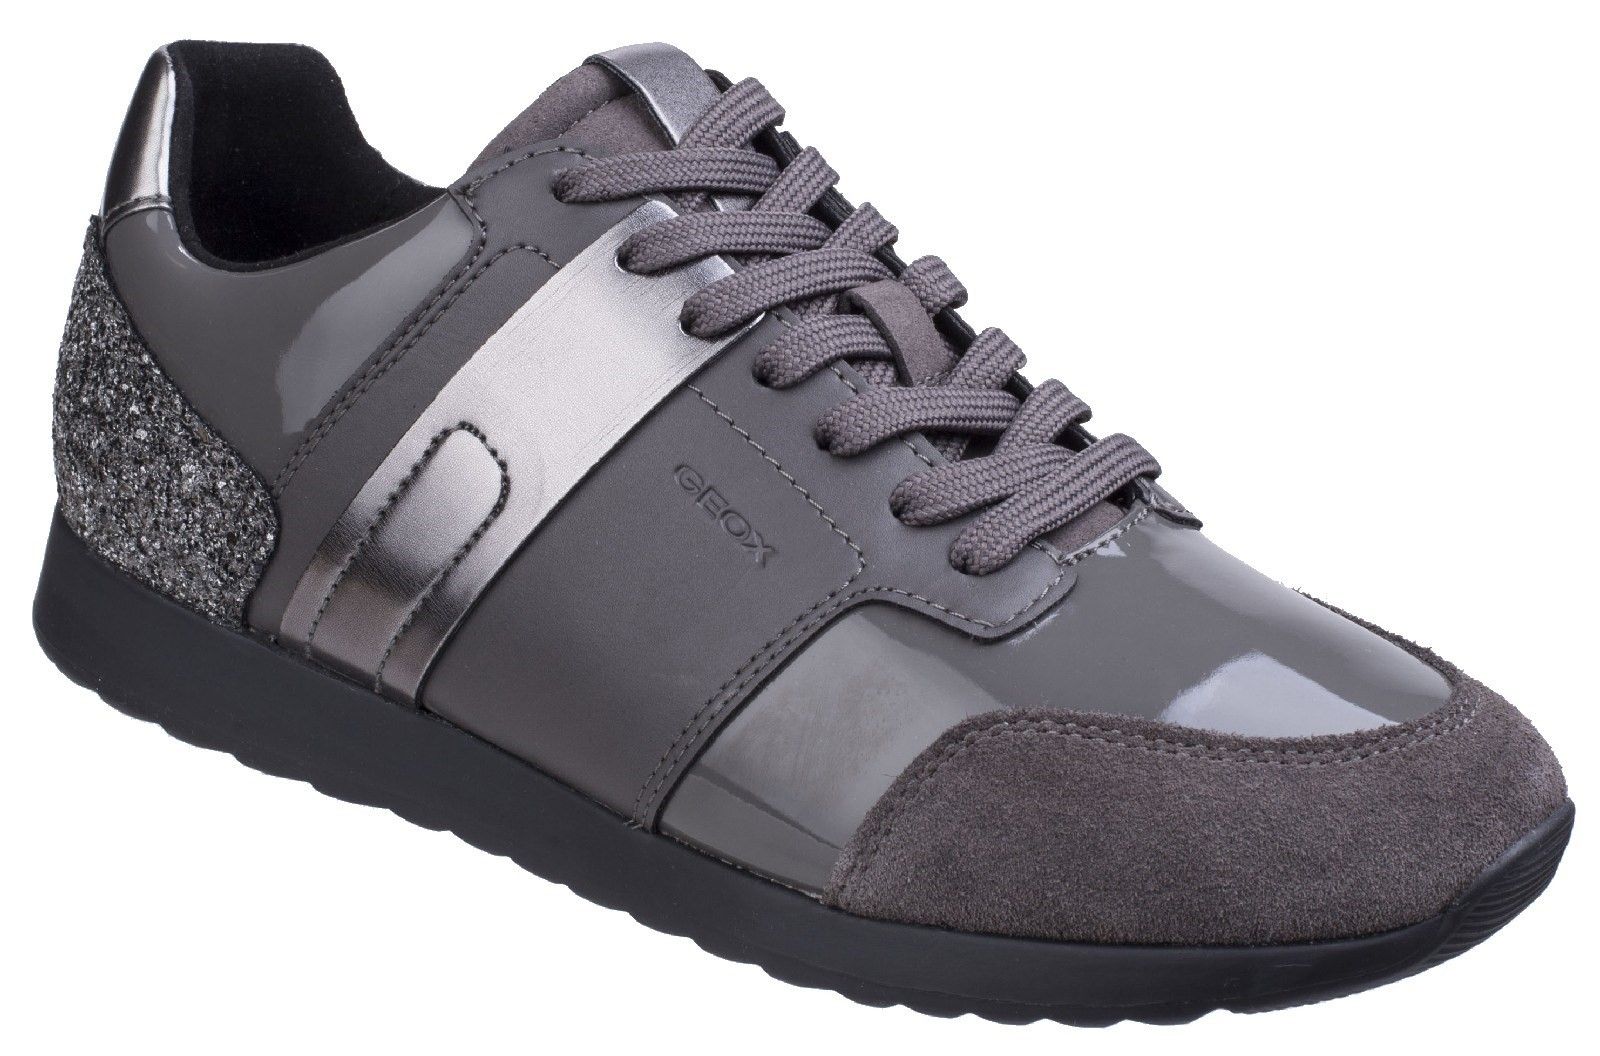 Casual dressy-style women's sneakers with an upper combining different materials. Geox patented perforated sole for breathability and comfort. Rubber sole ensuring grip and durability.Adjustable. 
Sports Design. 
Anti-Slip Outsole.